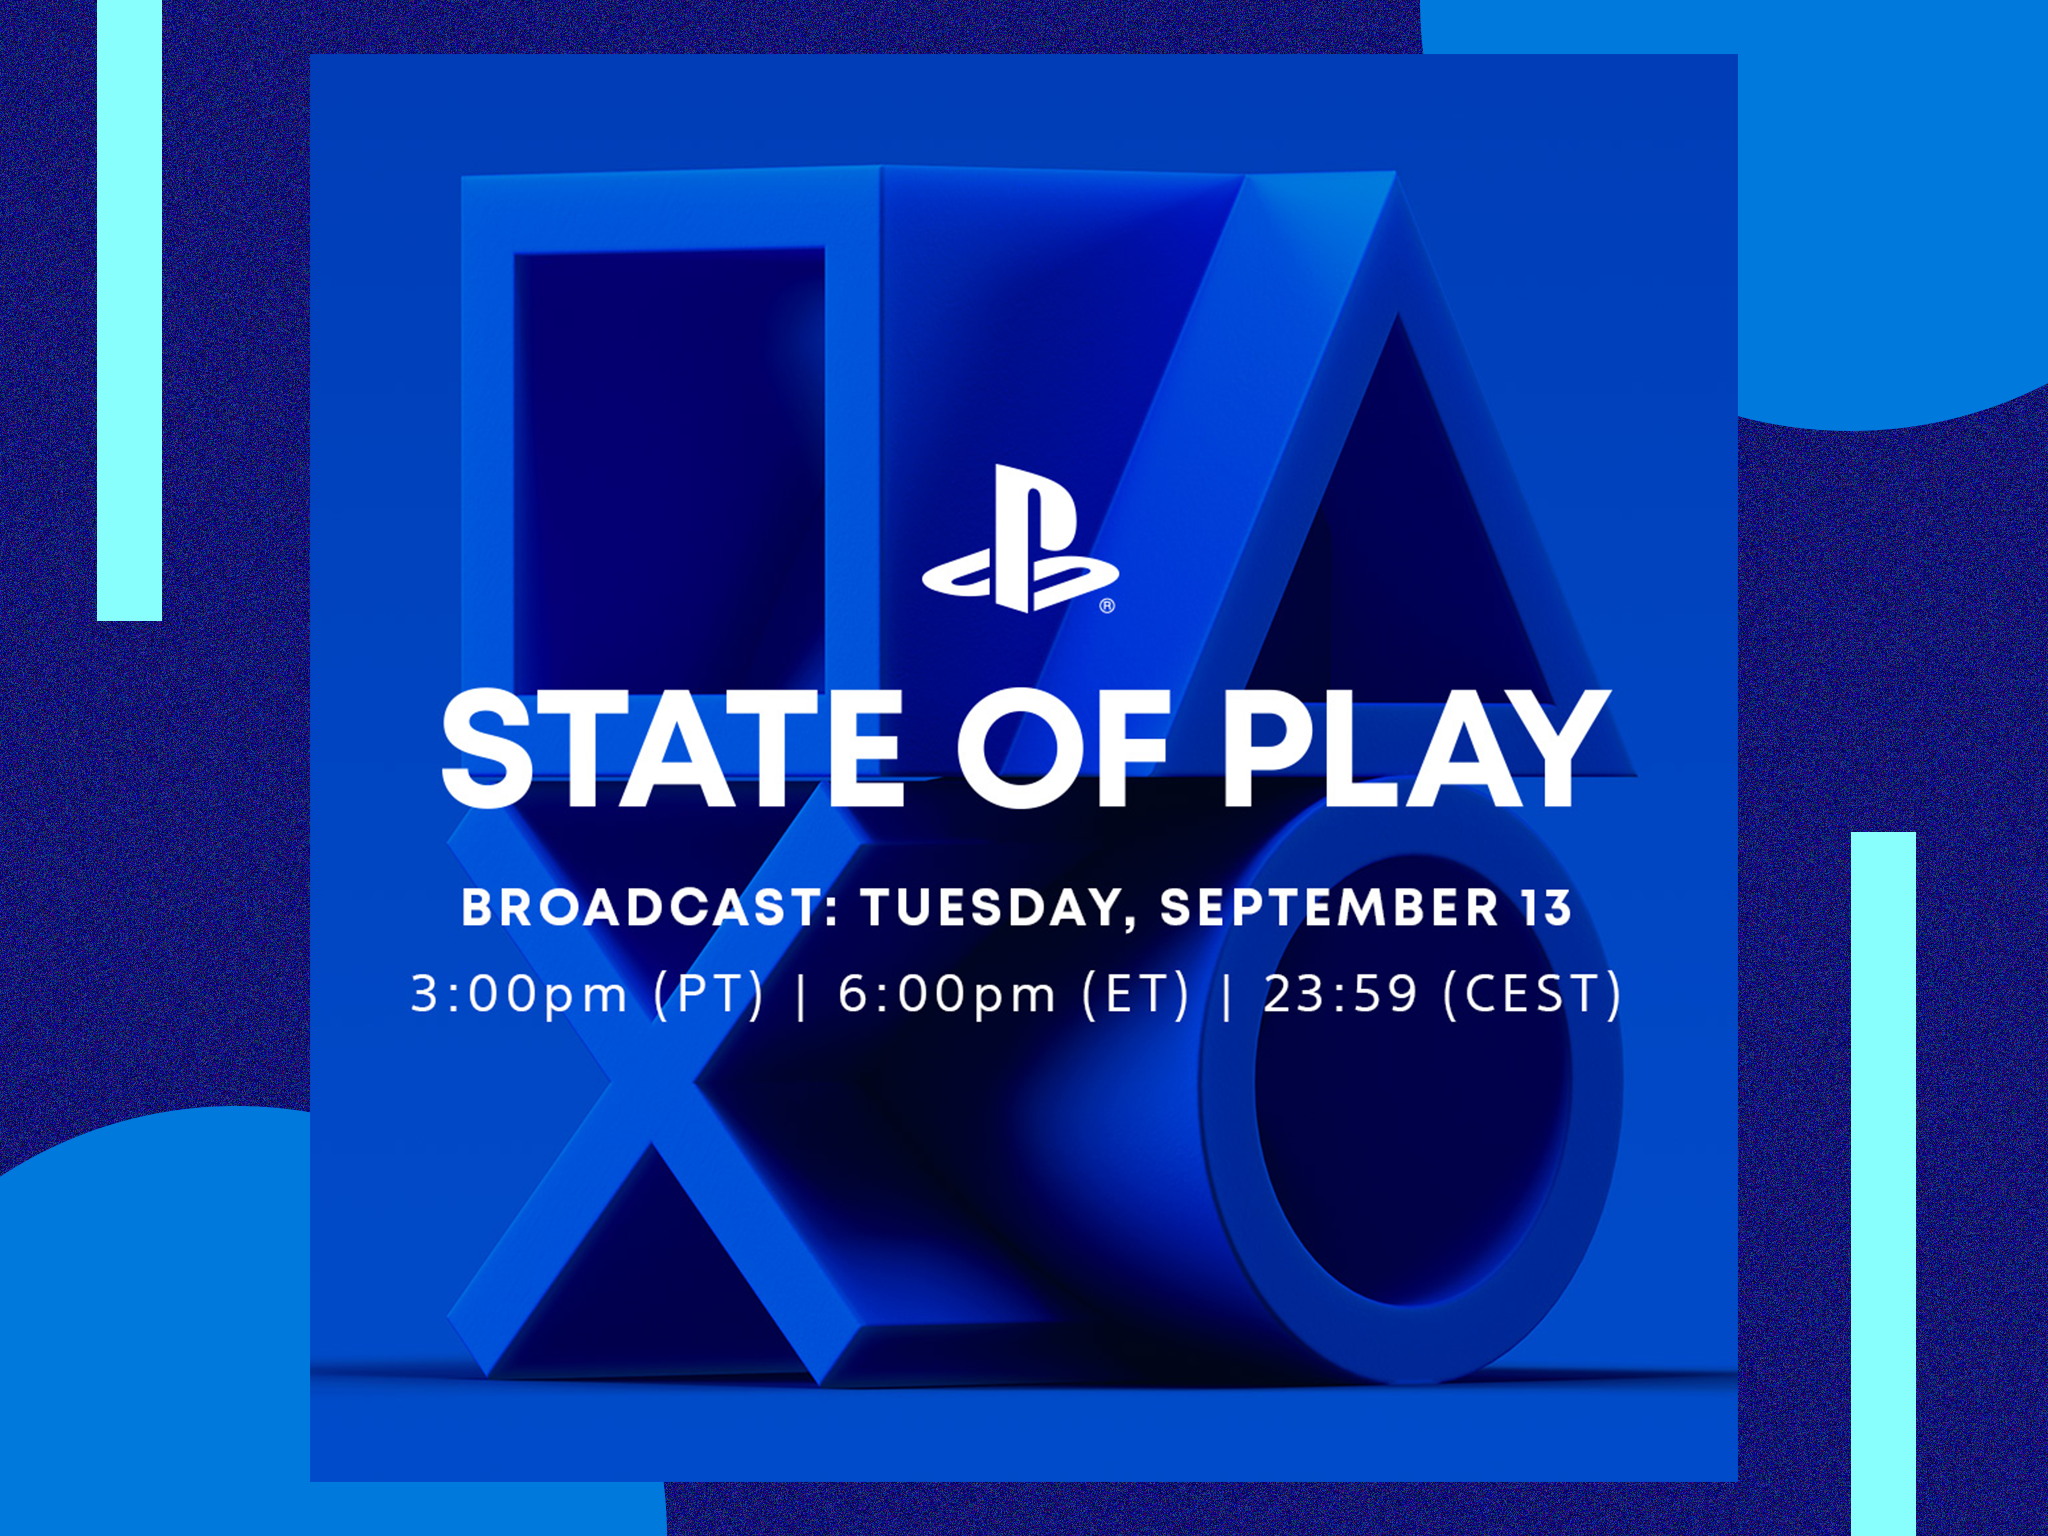 Everything Announced In Sony's PlayStation State of Play